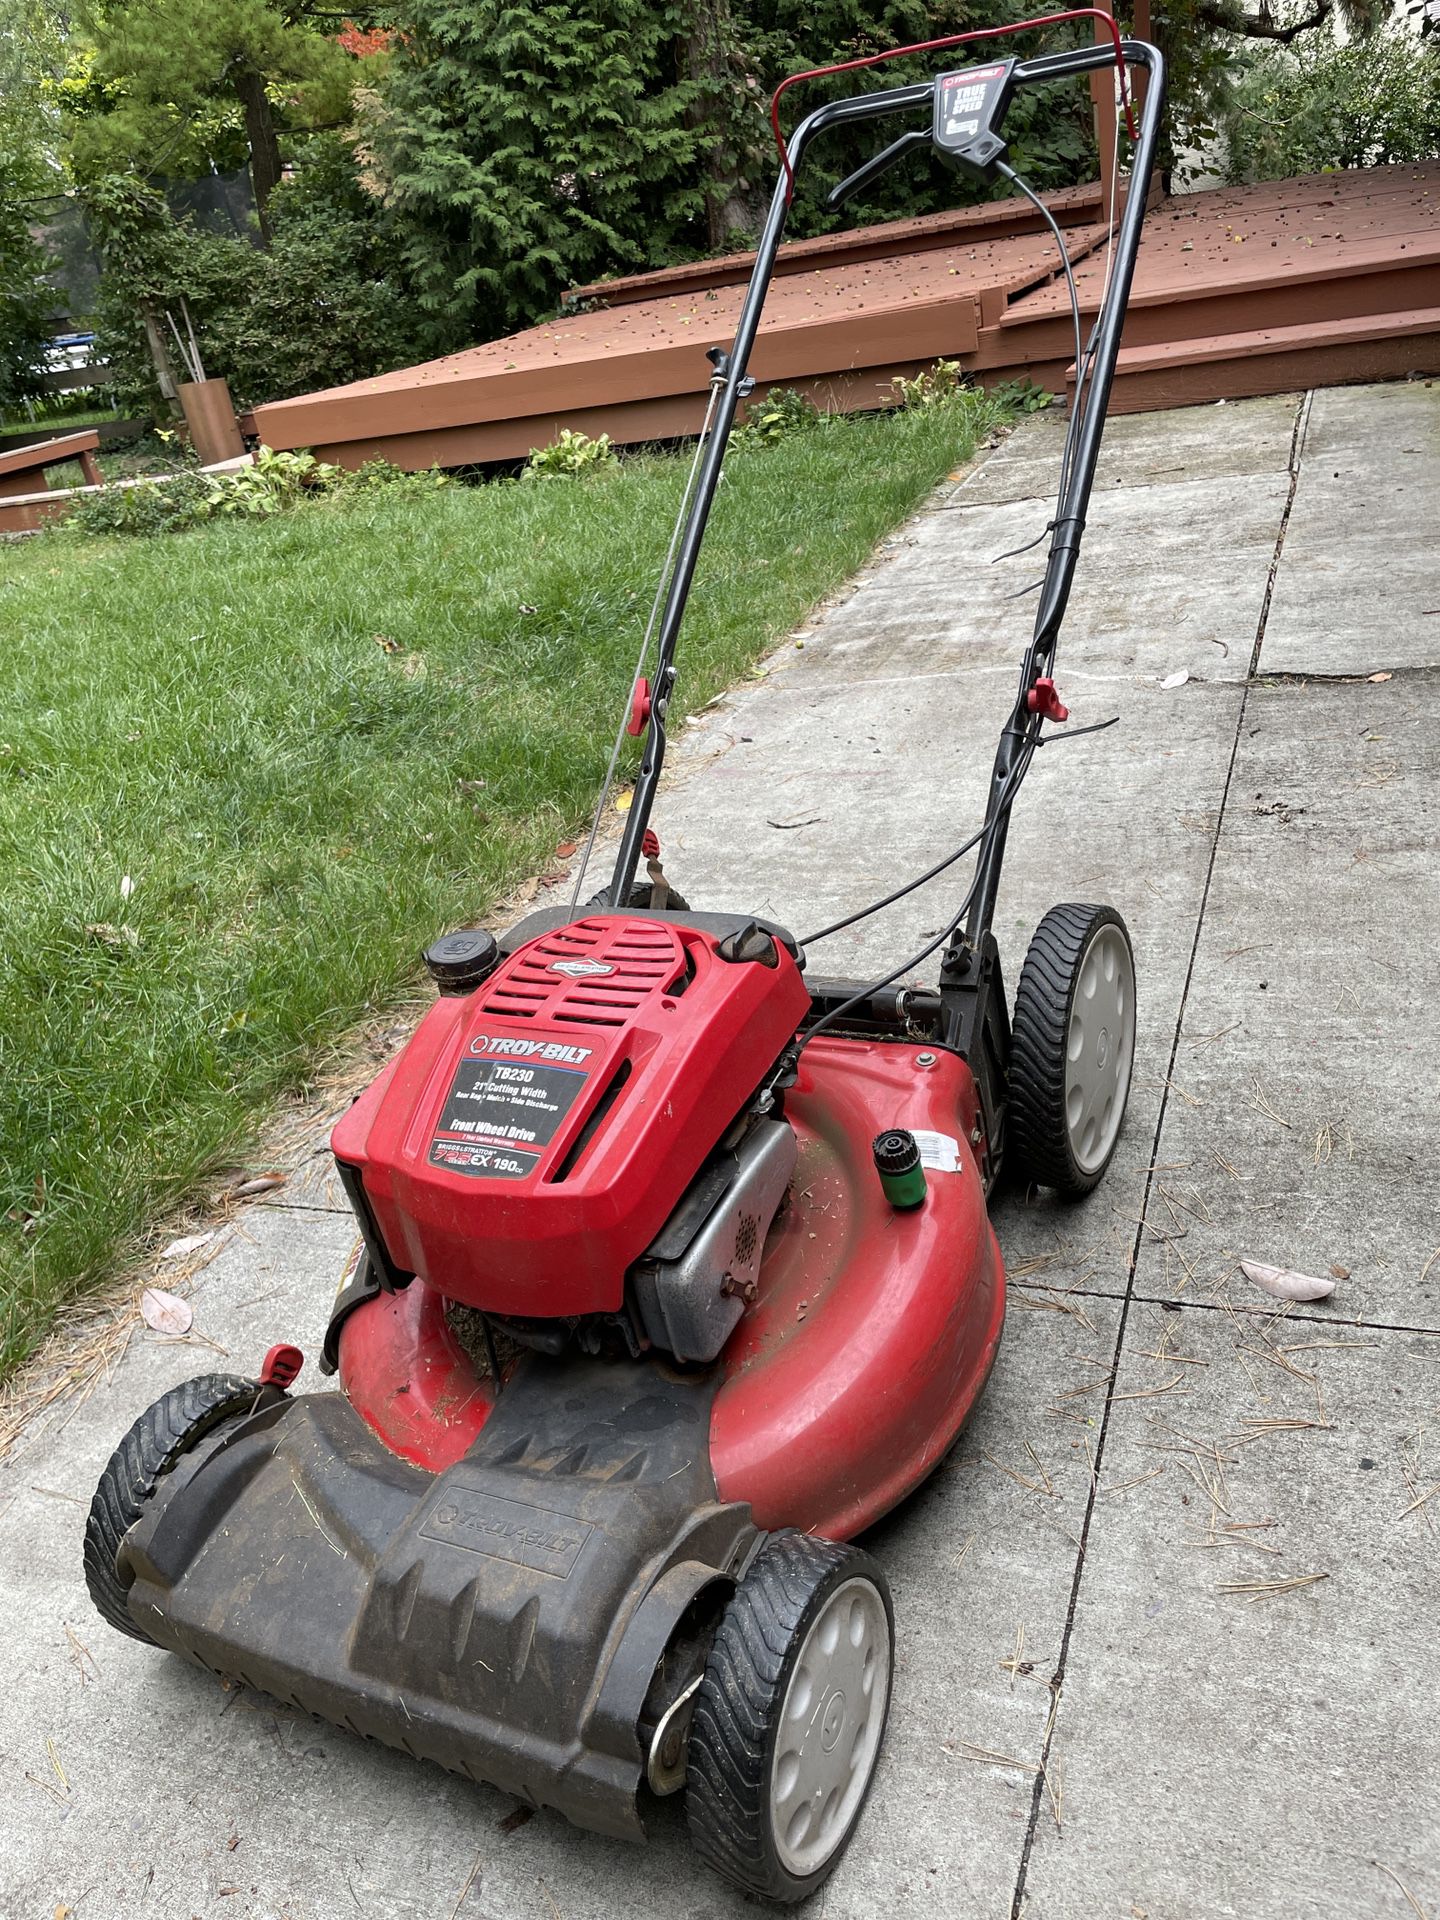 Troy - Bilt Push Lawn Mower WORKING Gas Lawnmower 21" Cutting Width Good Condition (pickup only)